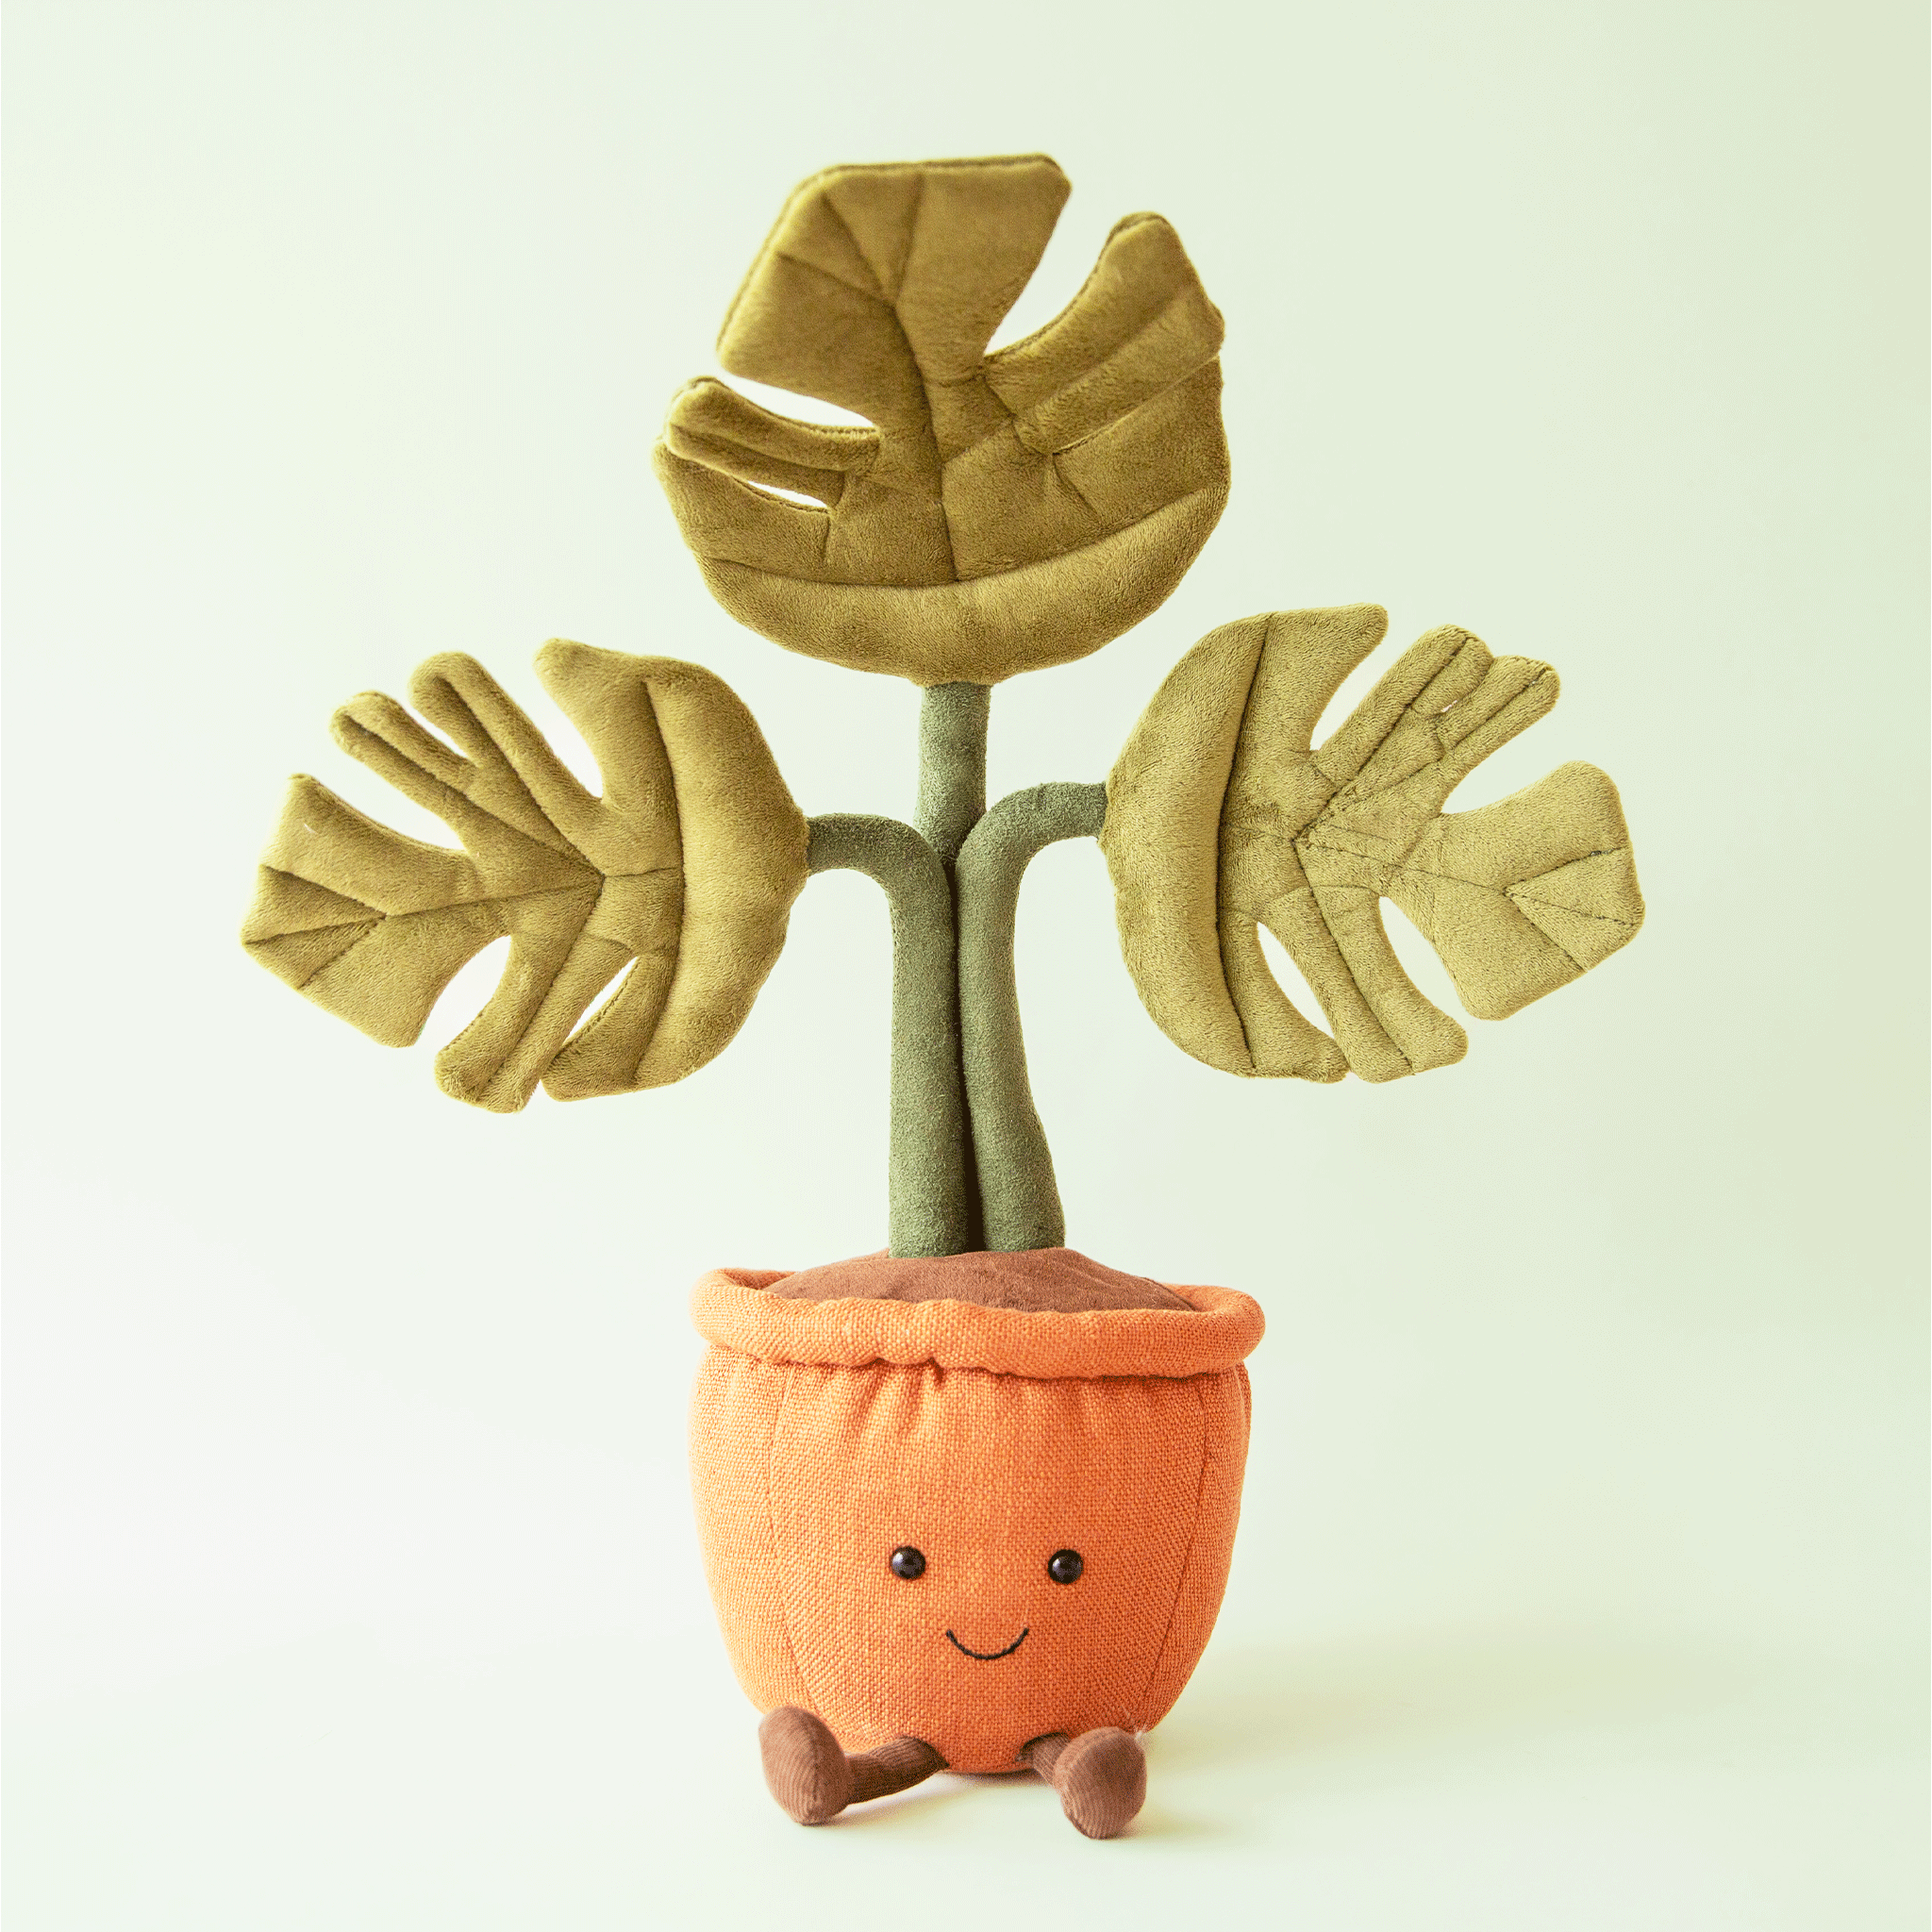 On a mint background is a stuffed toy shaped as a potted monstera plant with a smiling face and three leaves. 